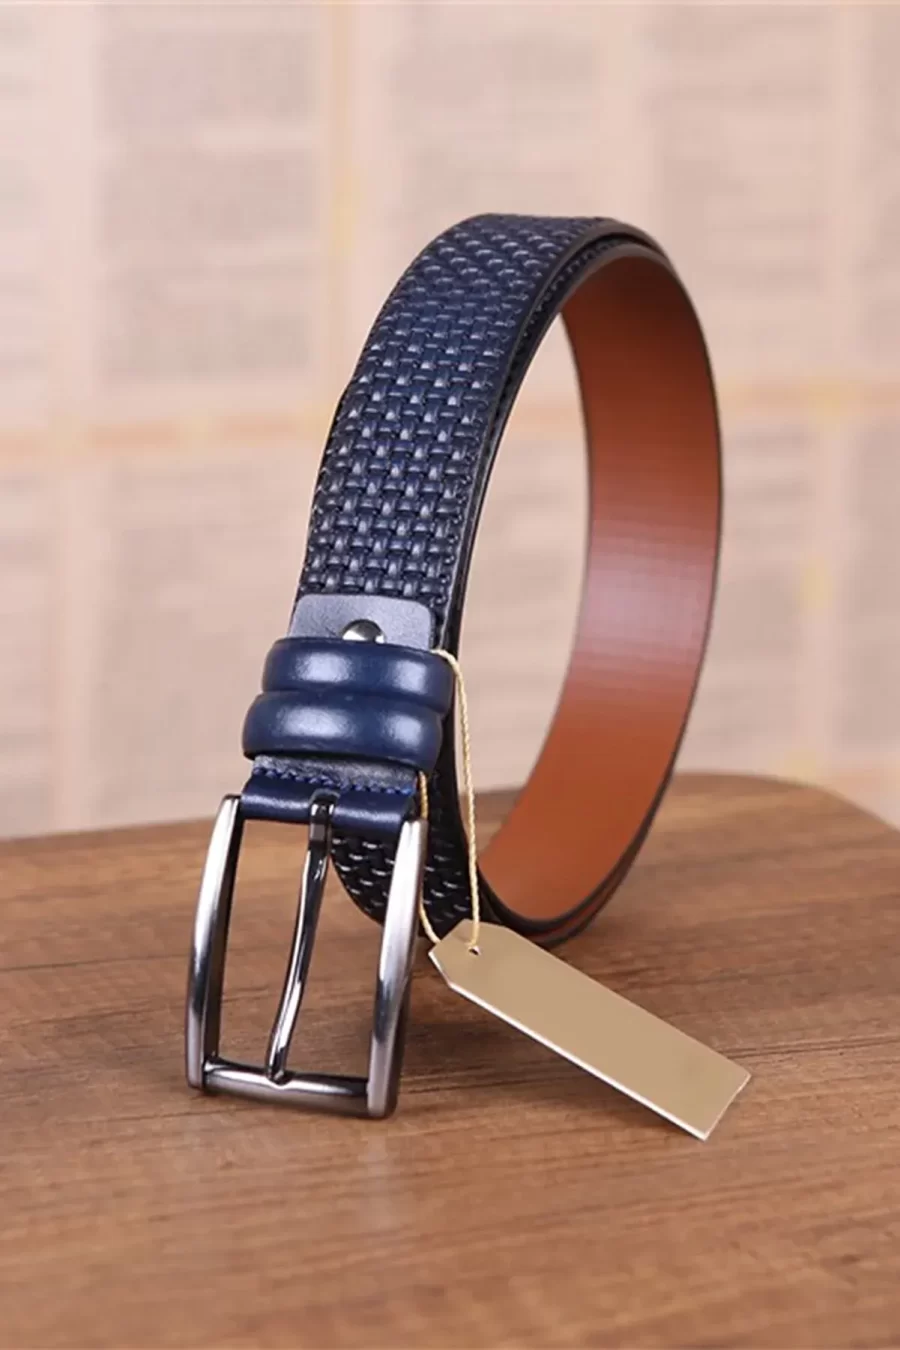 Blue Gents Leather Belt For Trousers Luxury KD 011 4 1